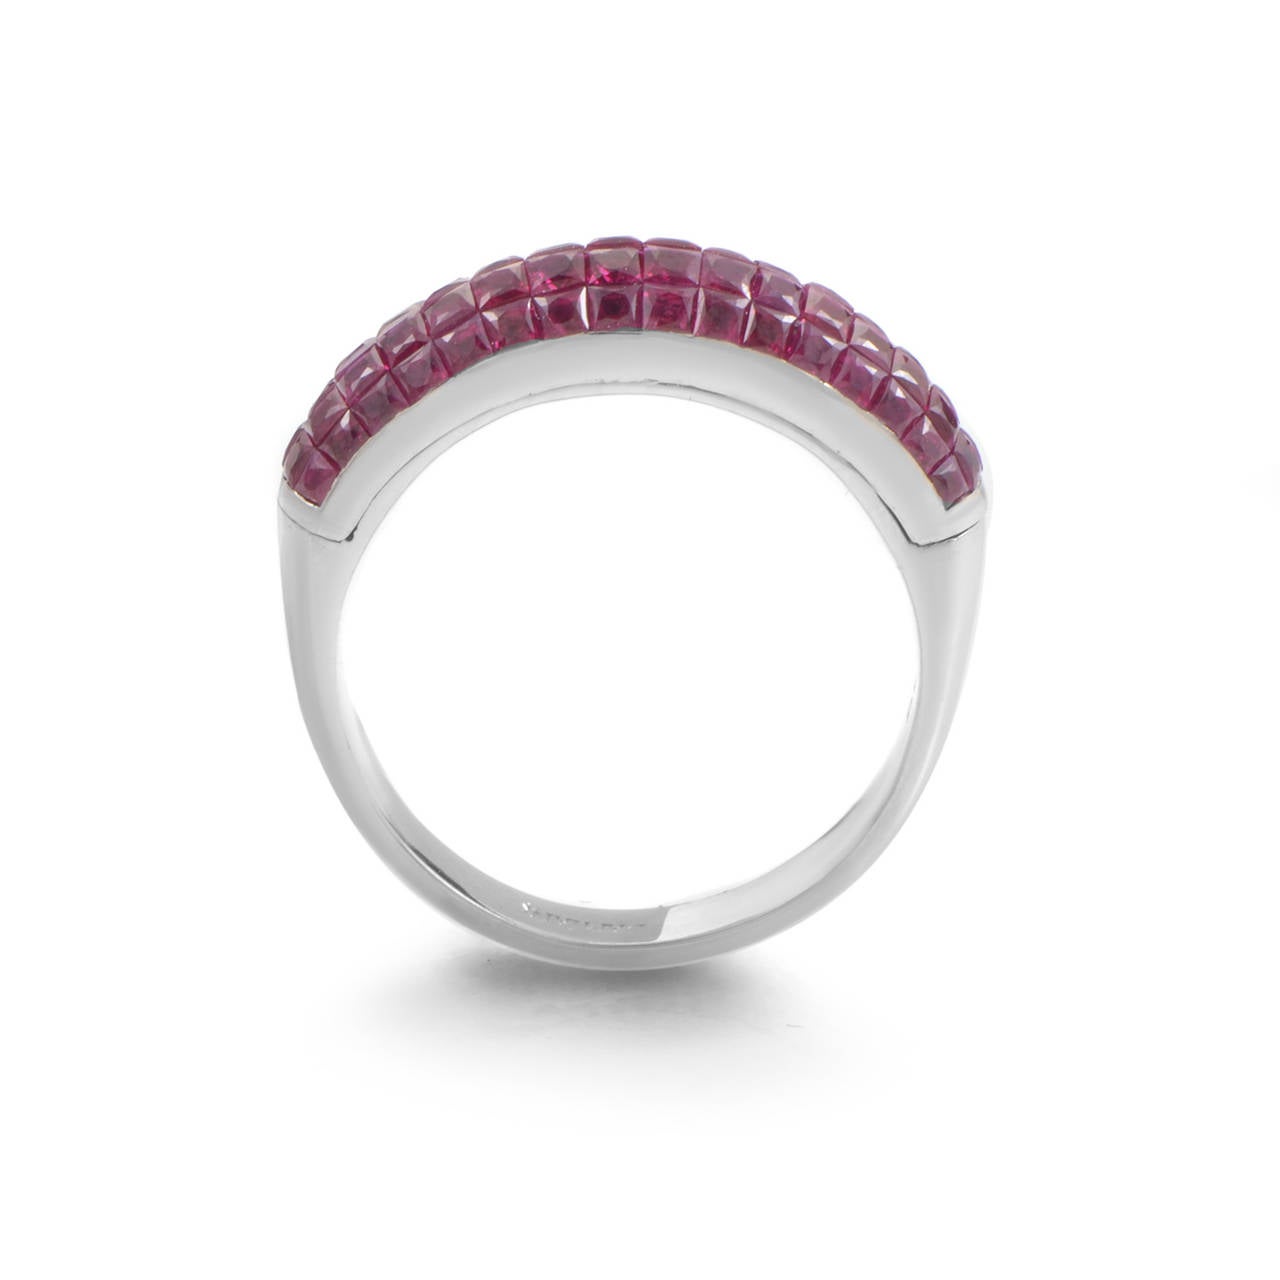 An appealing combination of cool tones of white gold and eye-catching hue of striking rubies, this majestic ring from Damiani boasts tasteful alluring appearance that will look great in any occasion; the ring weighs seven grams, while the gems total